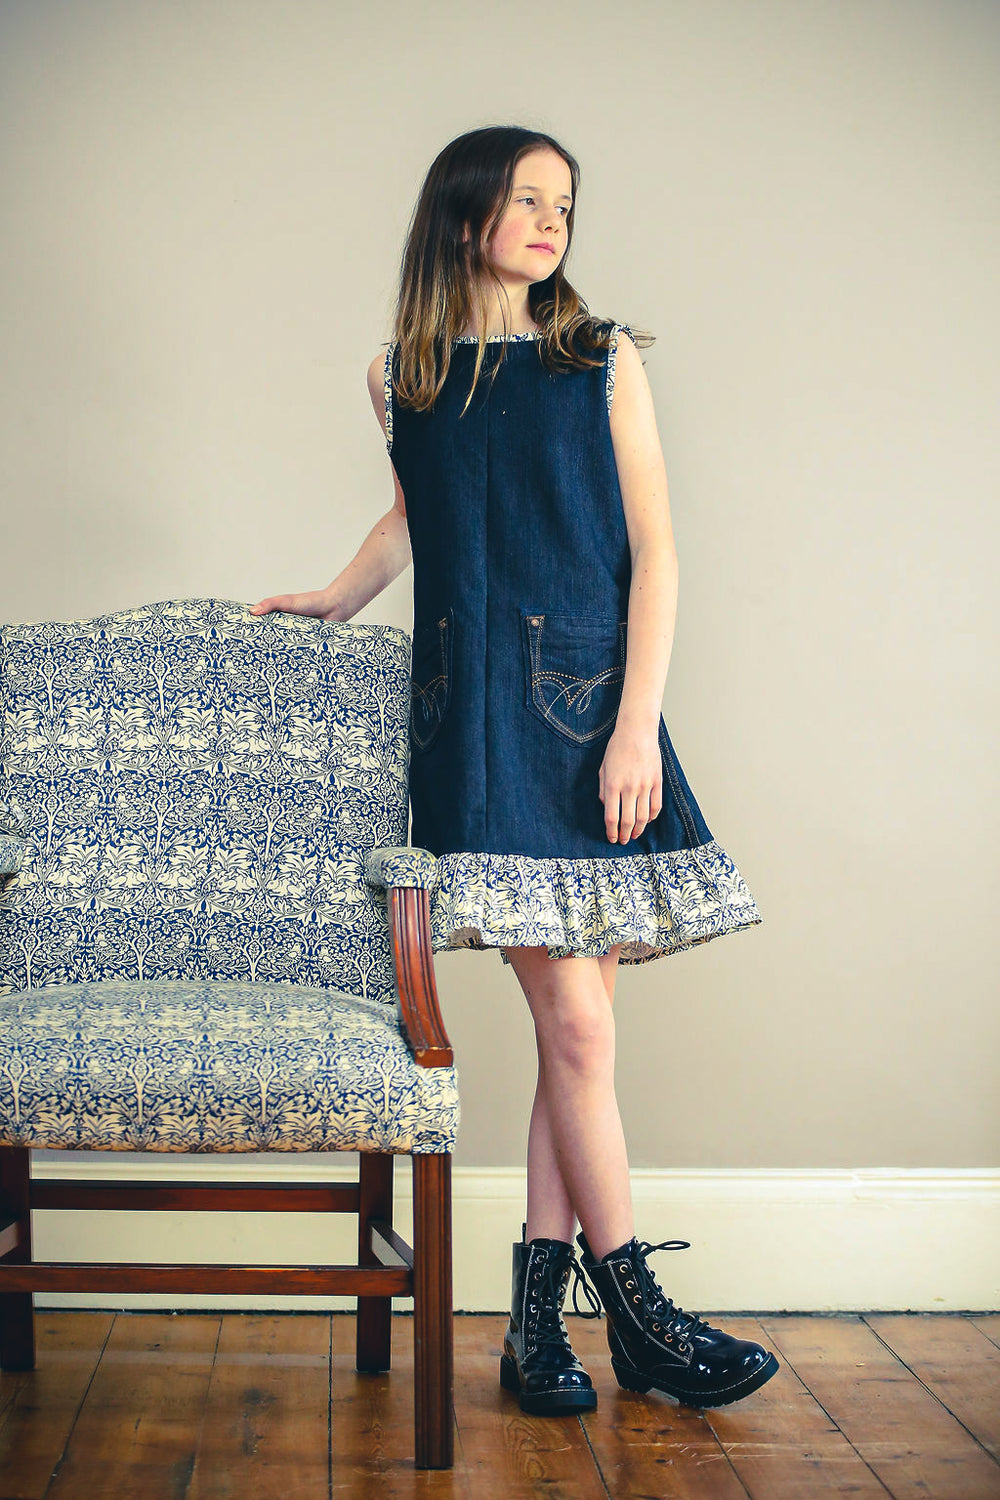 Child wearing the Jeans to Child/Teen Dornoch Dress sewing pattern by Greyfriars and Grace. A sleeveless dress pattern made in pre-loved denim fabrics, featuring an A-line silhouette, front pockets, back zip closure, hem ruffle, and contrasting bias bindi